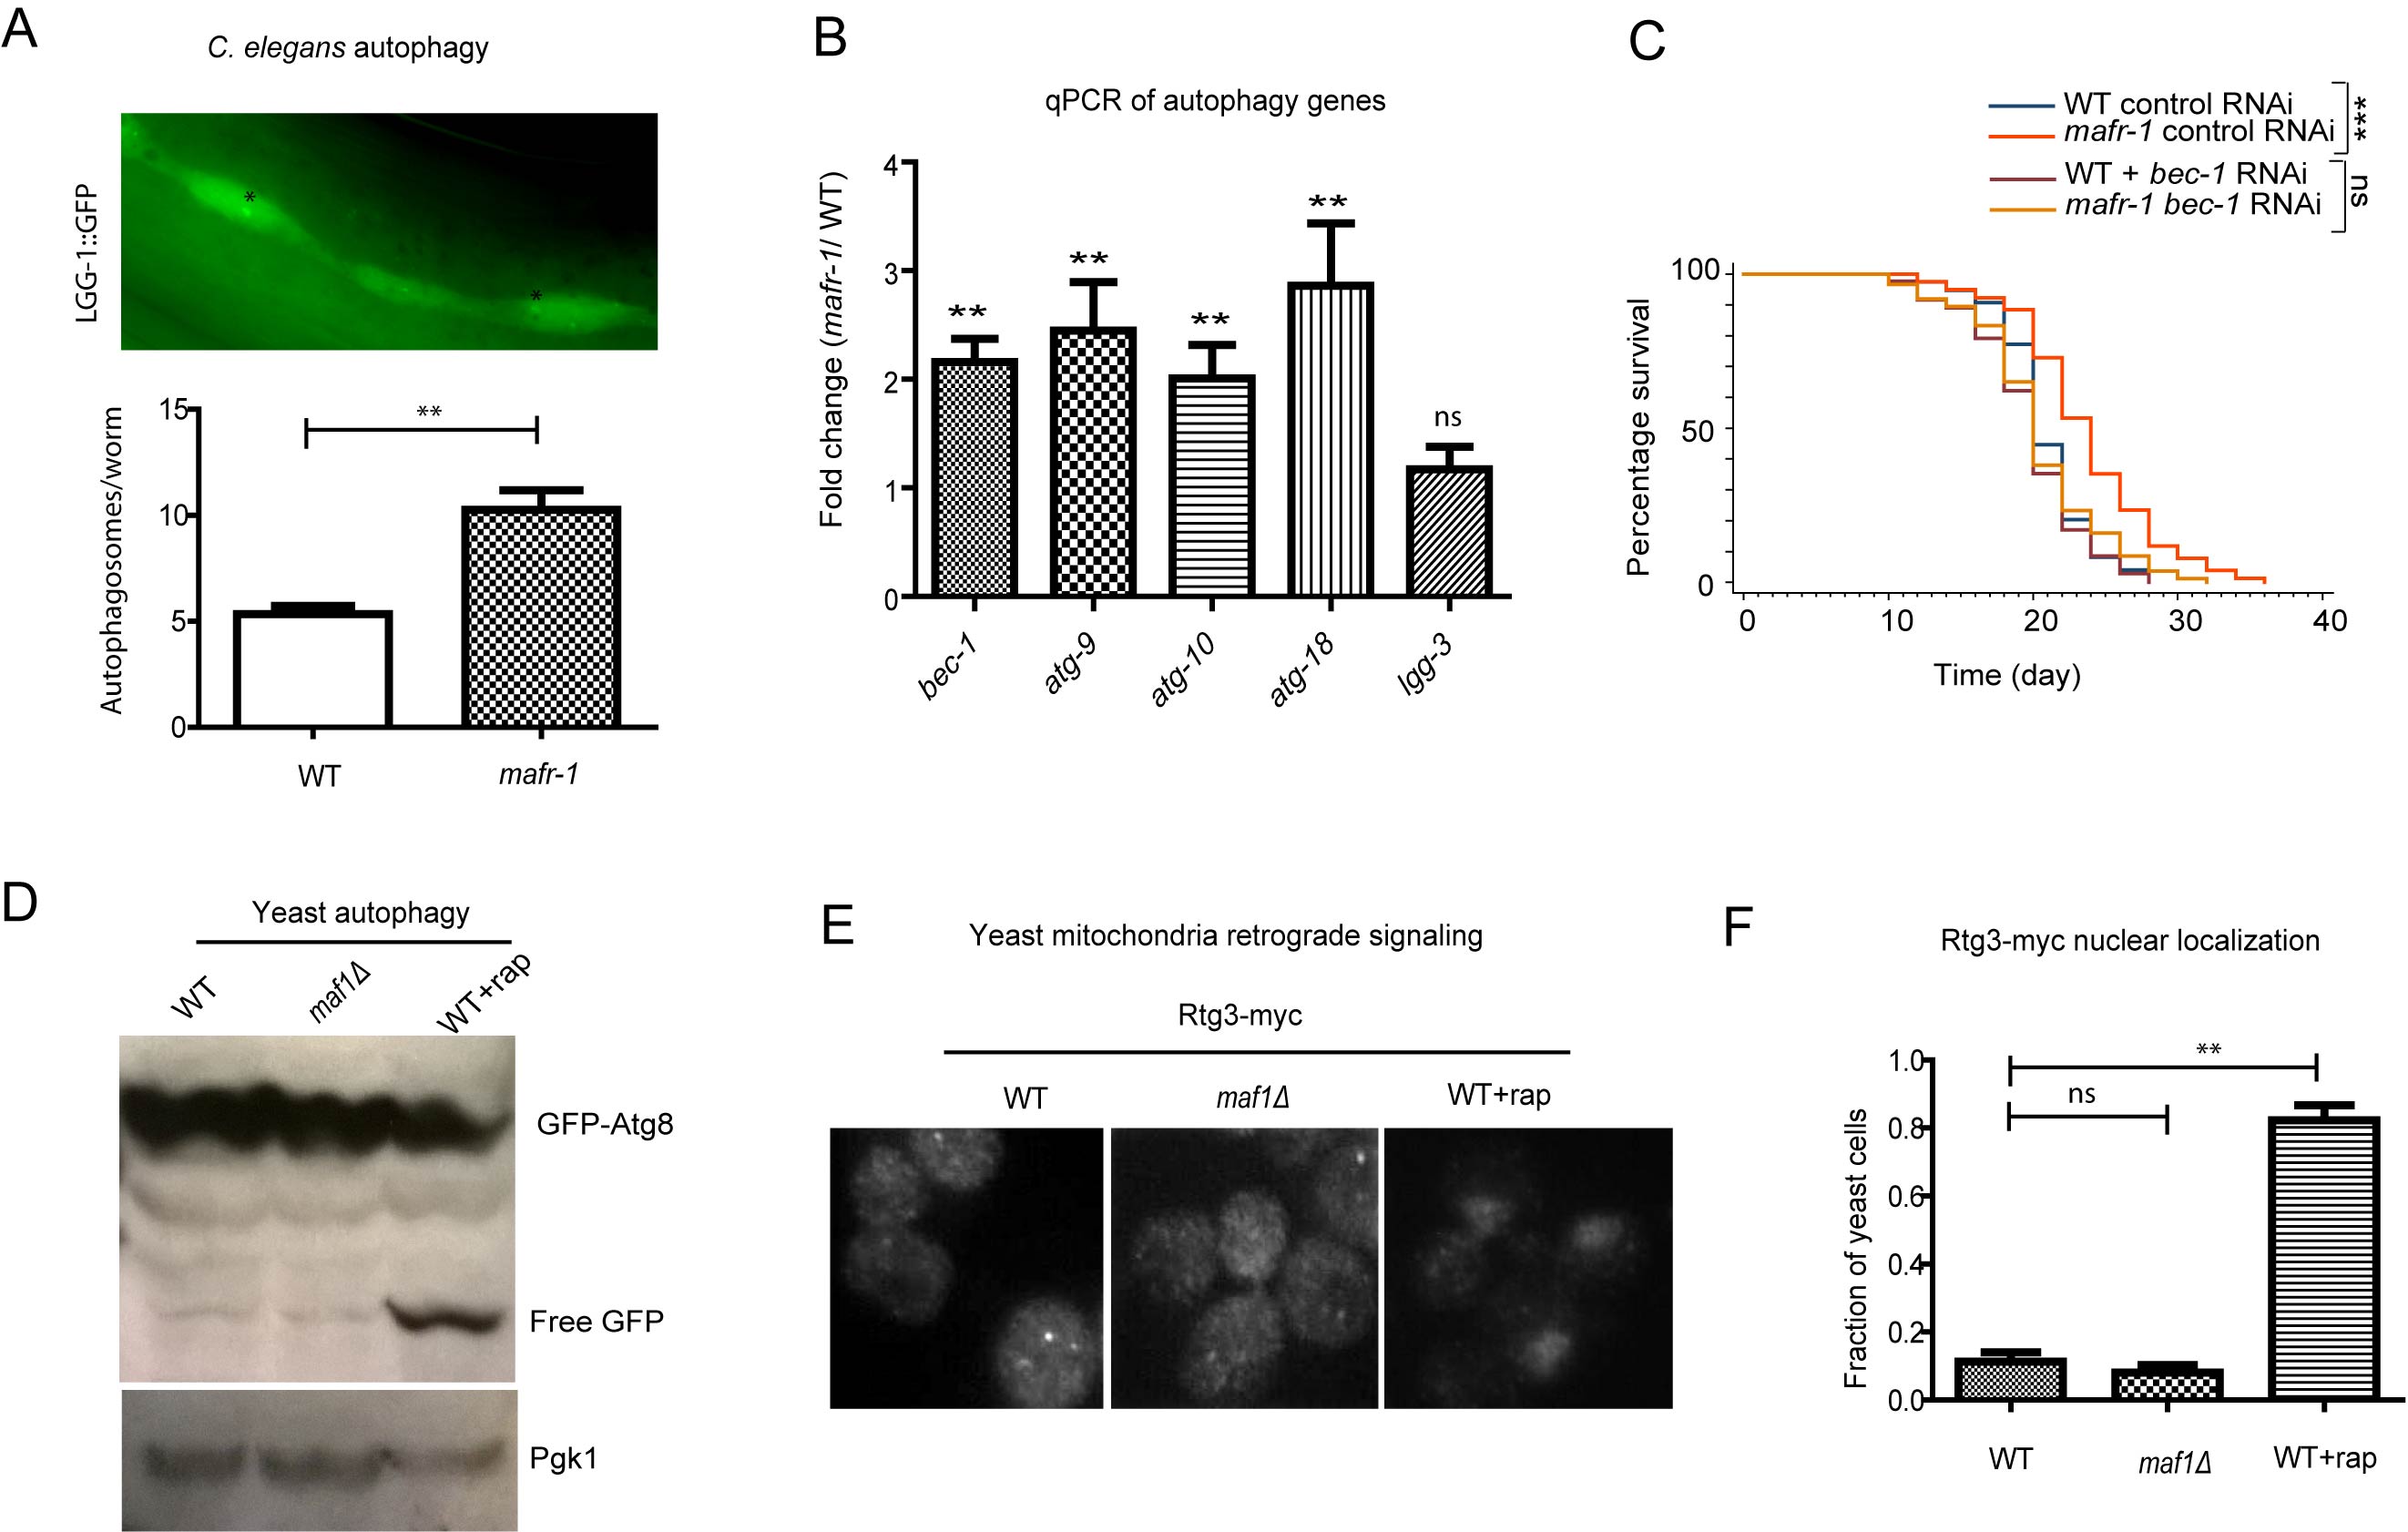 Autophagy is induced in worms with MAFR-1 loss.